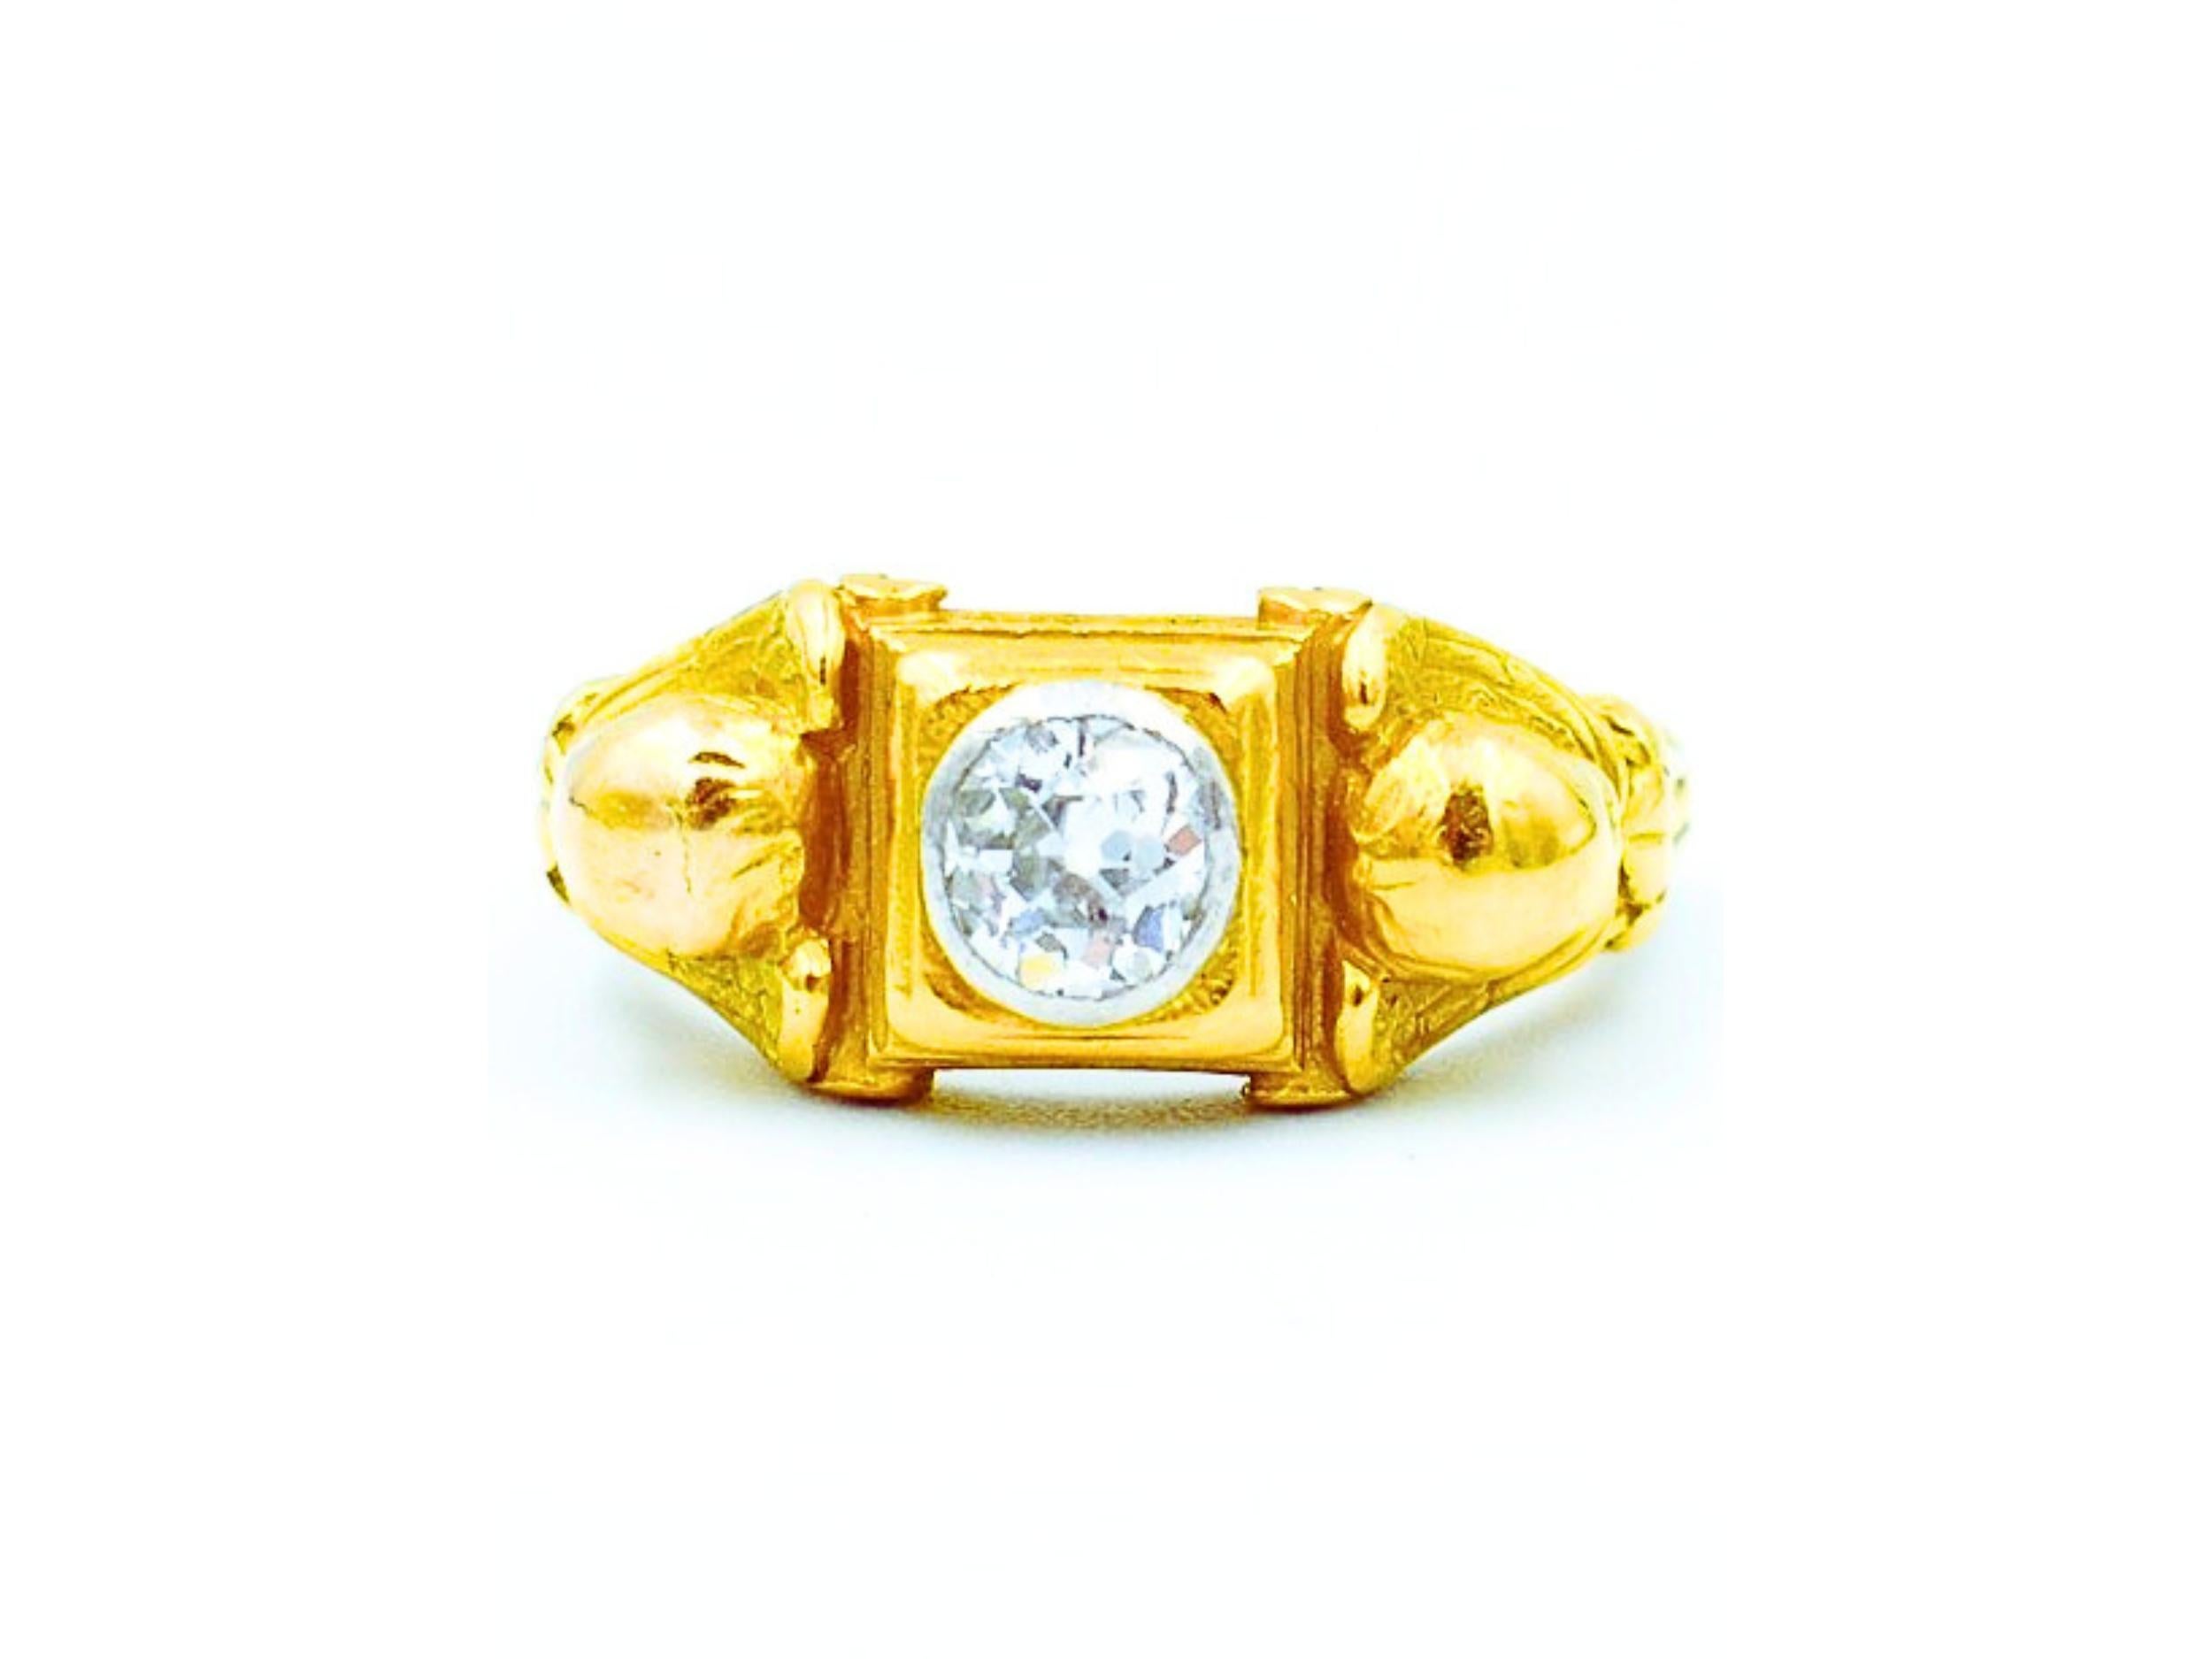 Discover a true collector's item with this rare and unique ring from the renowned jeweler Arnould. As one of the few Arnould rings available on the market, this precious 18-carat gold and diamond jewel is an exceptional find that will captivate